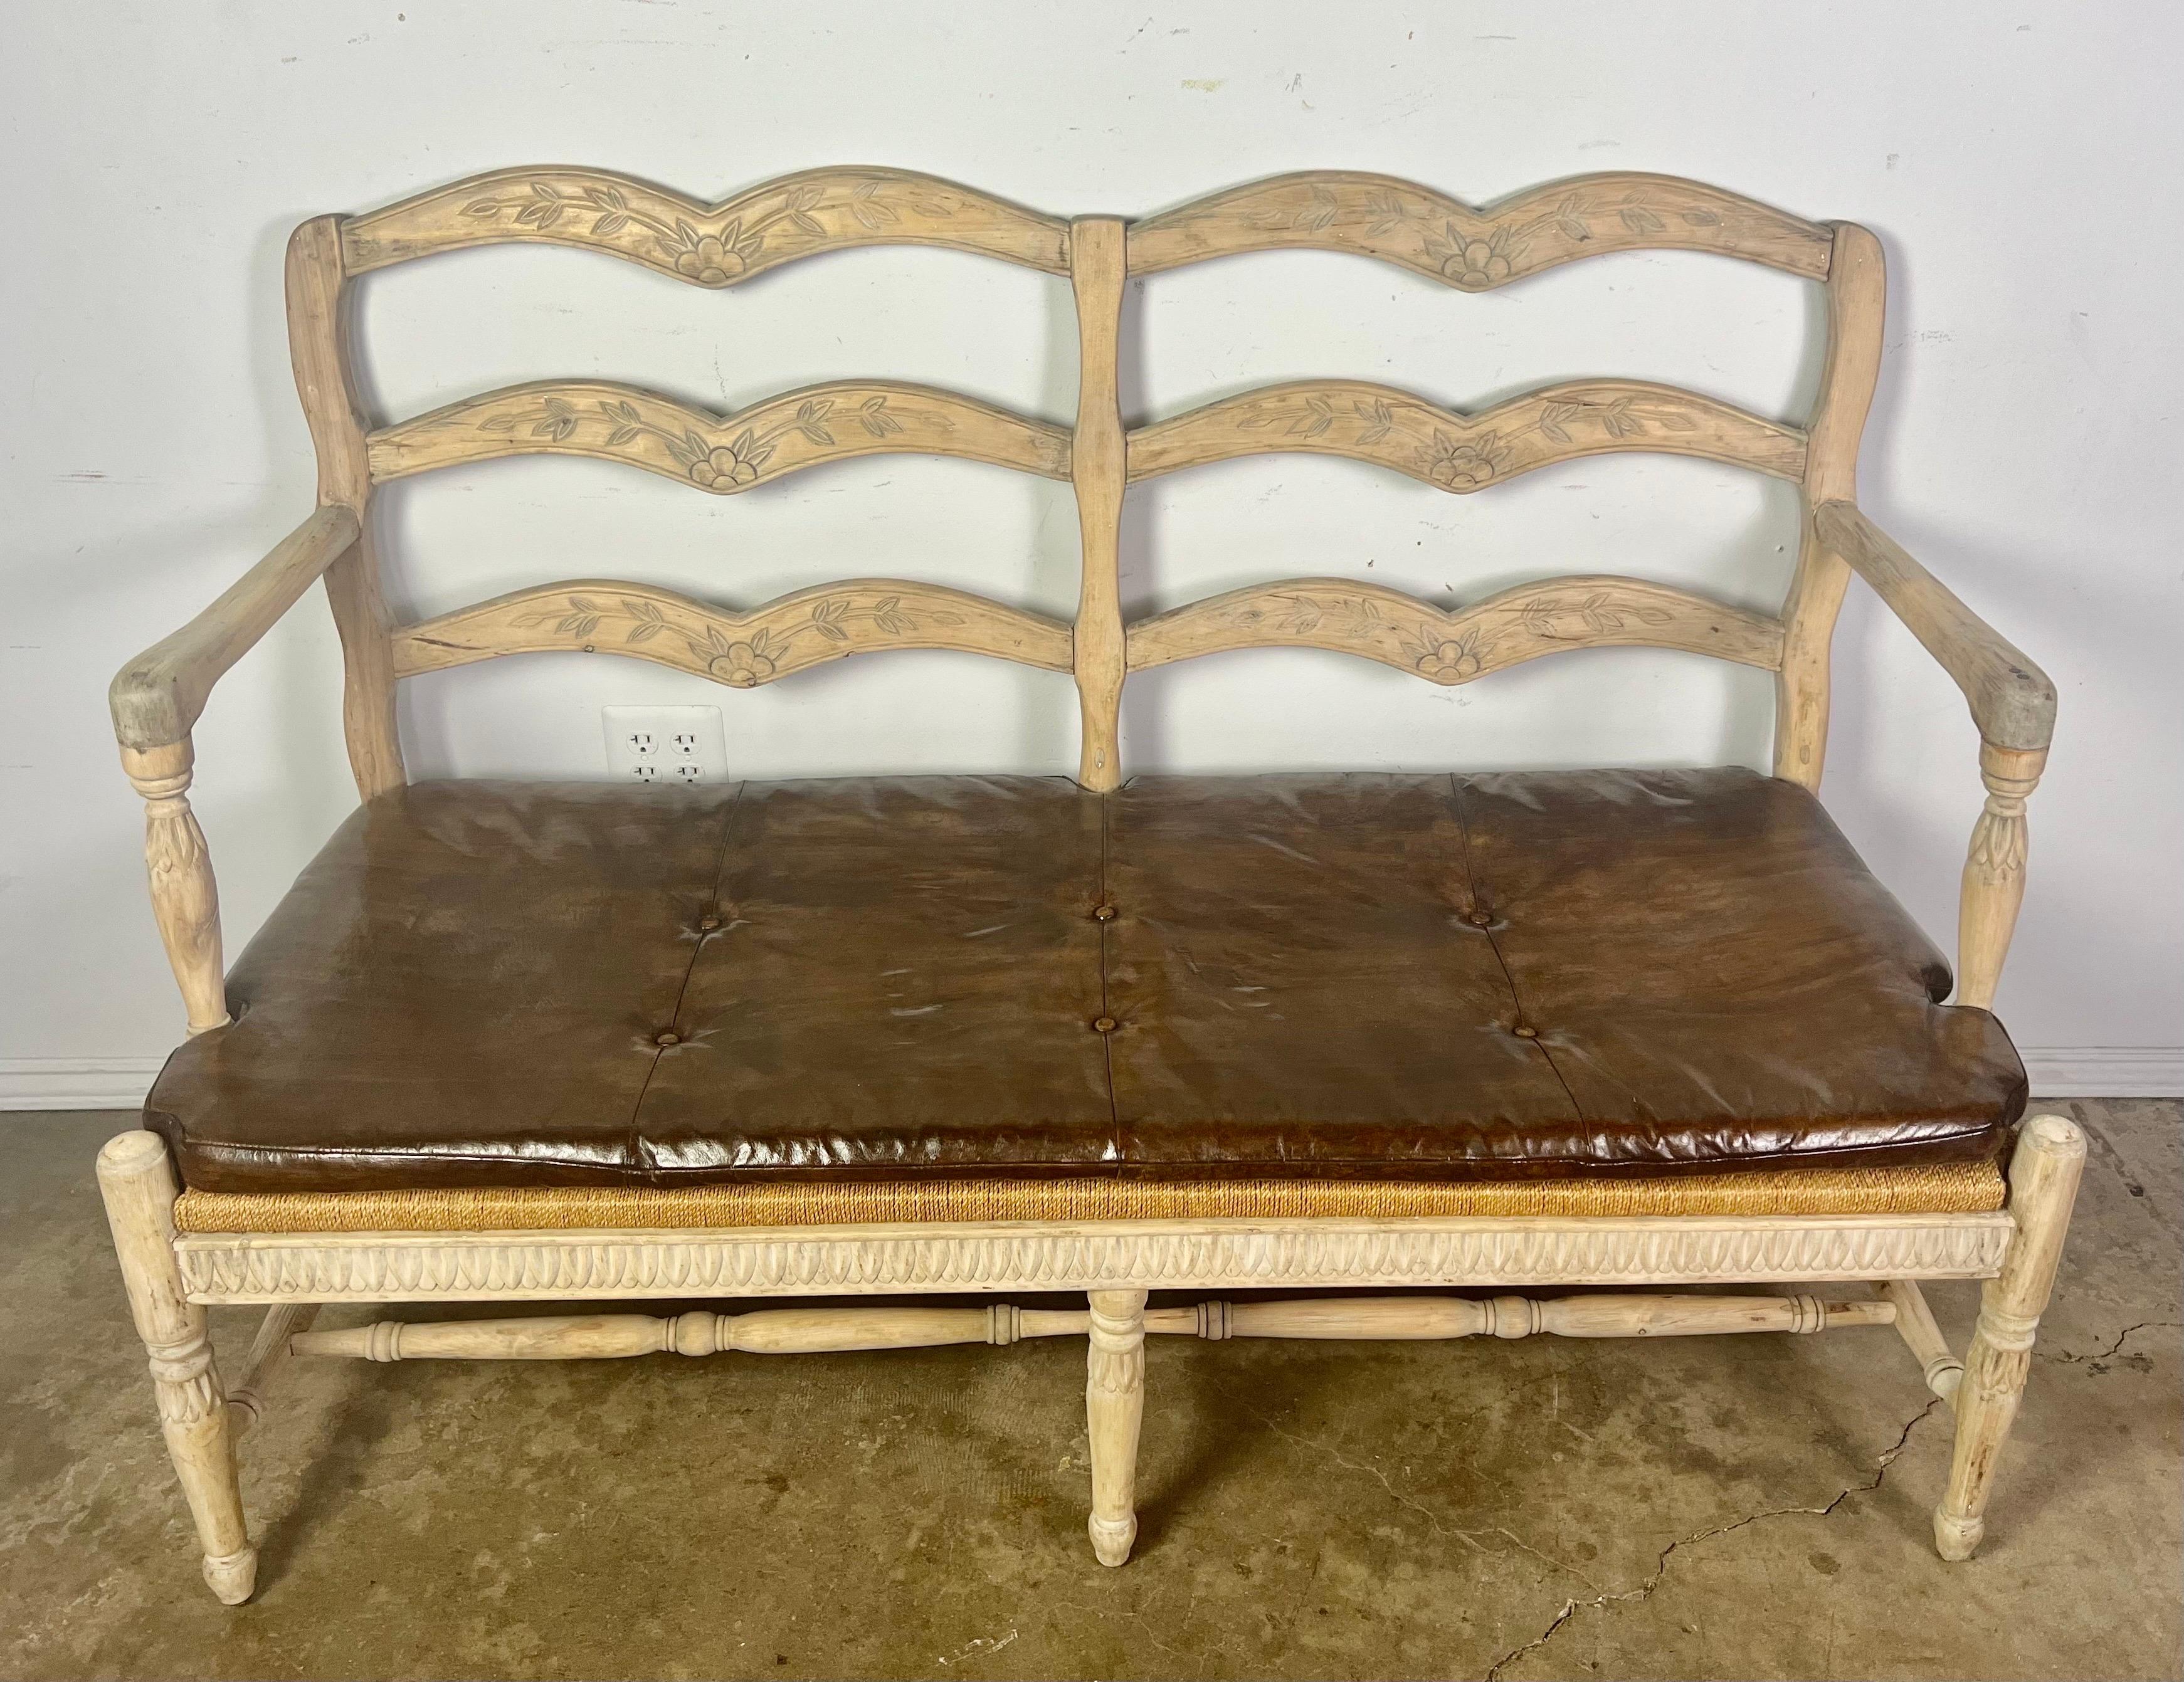 French Provincial style ladder back settee w/ leather cushion & rush seat. The bench stand on six straight legs connected by bottom stretchers. Carved flowers are added onto the frame of the sofa. There is a loose leather seat cushion for extra